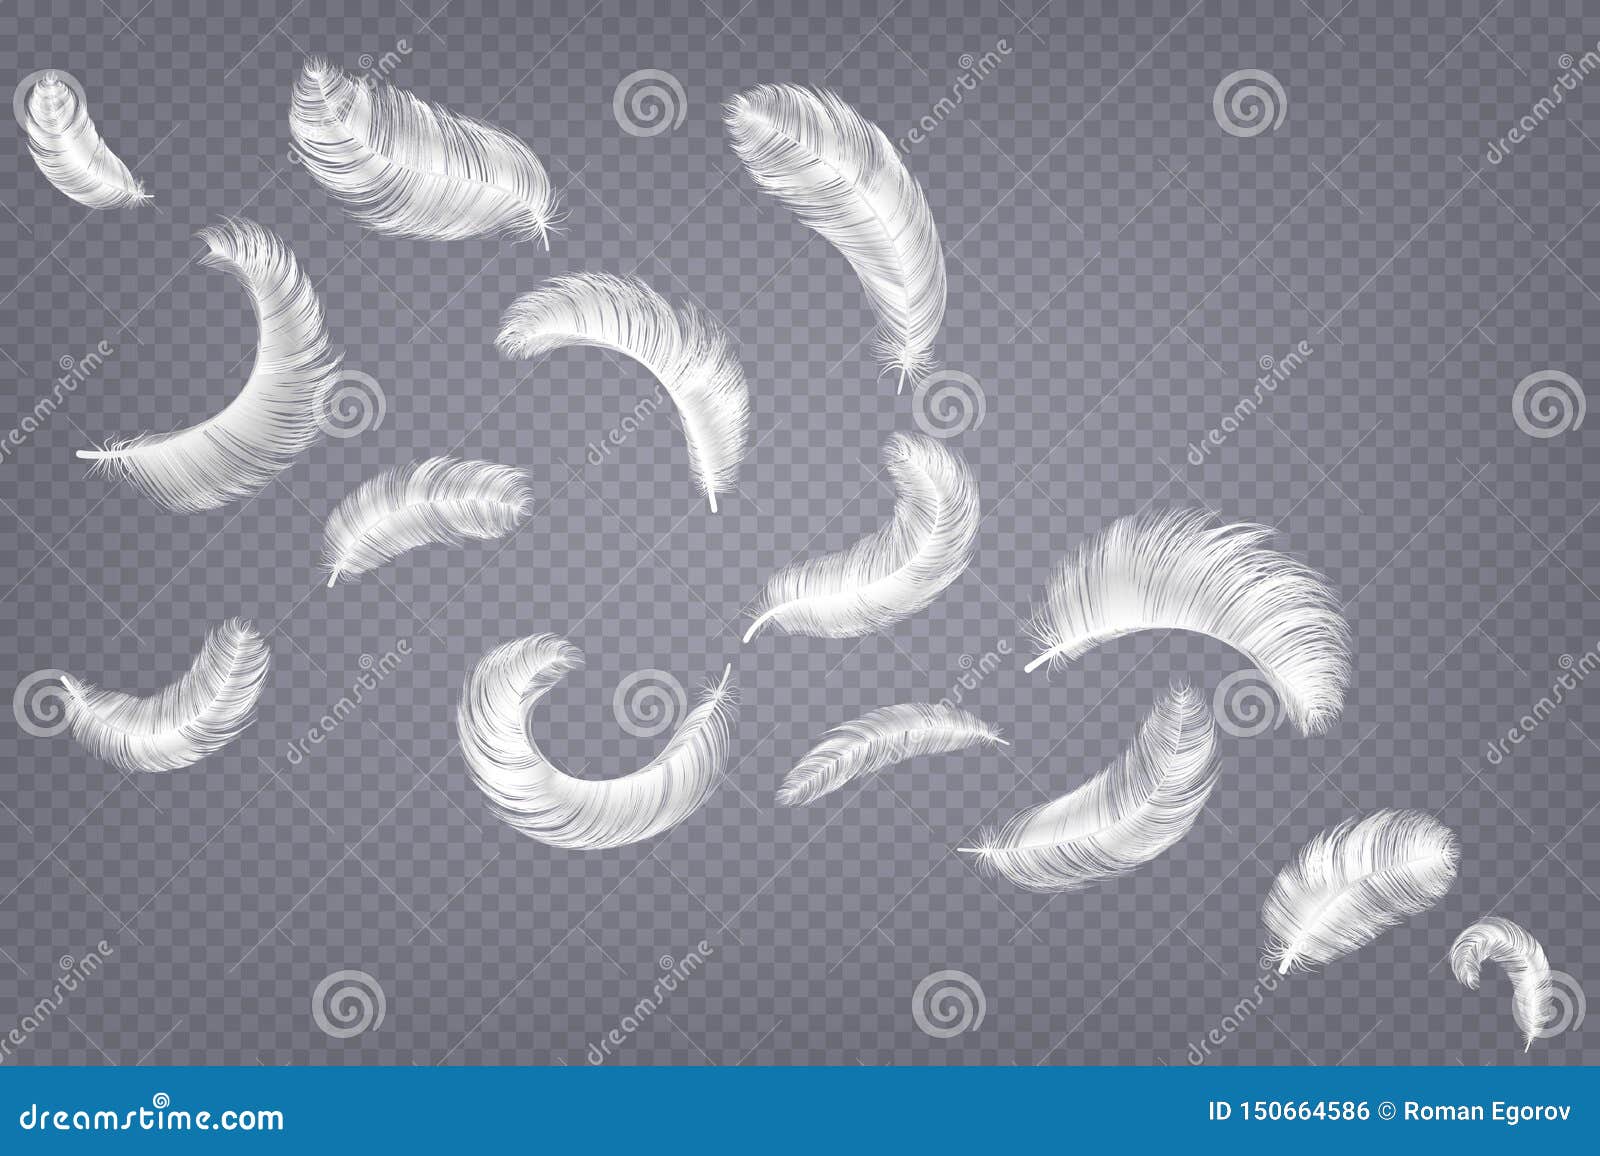 realistic feathers. fluffy white goose and swan different falling fluffy twirled feather, weightless plume 